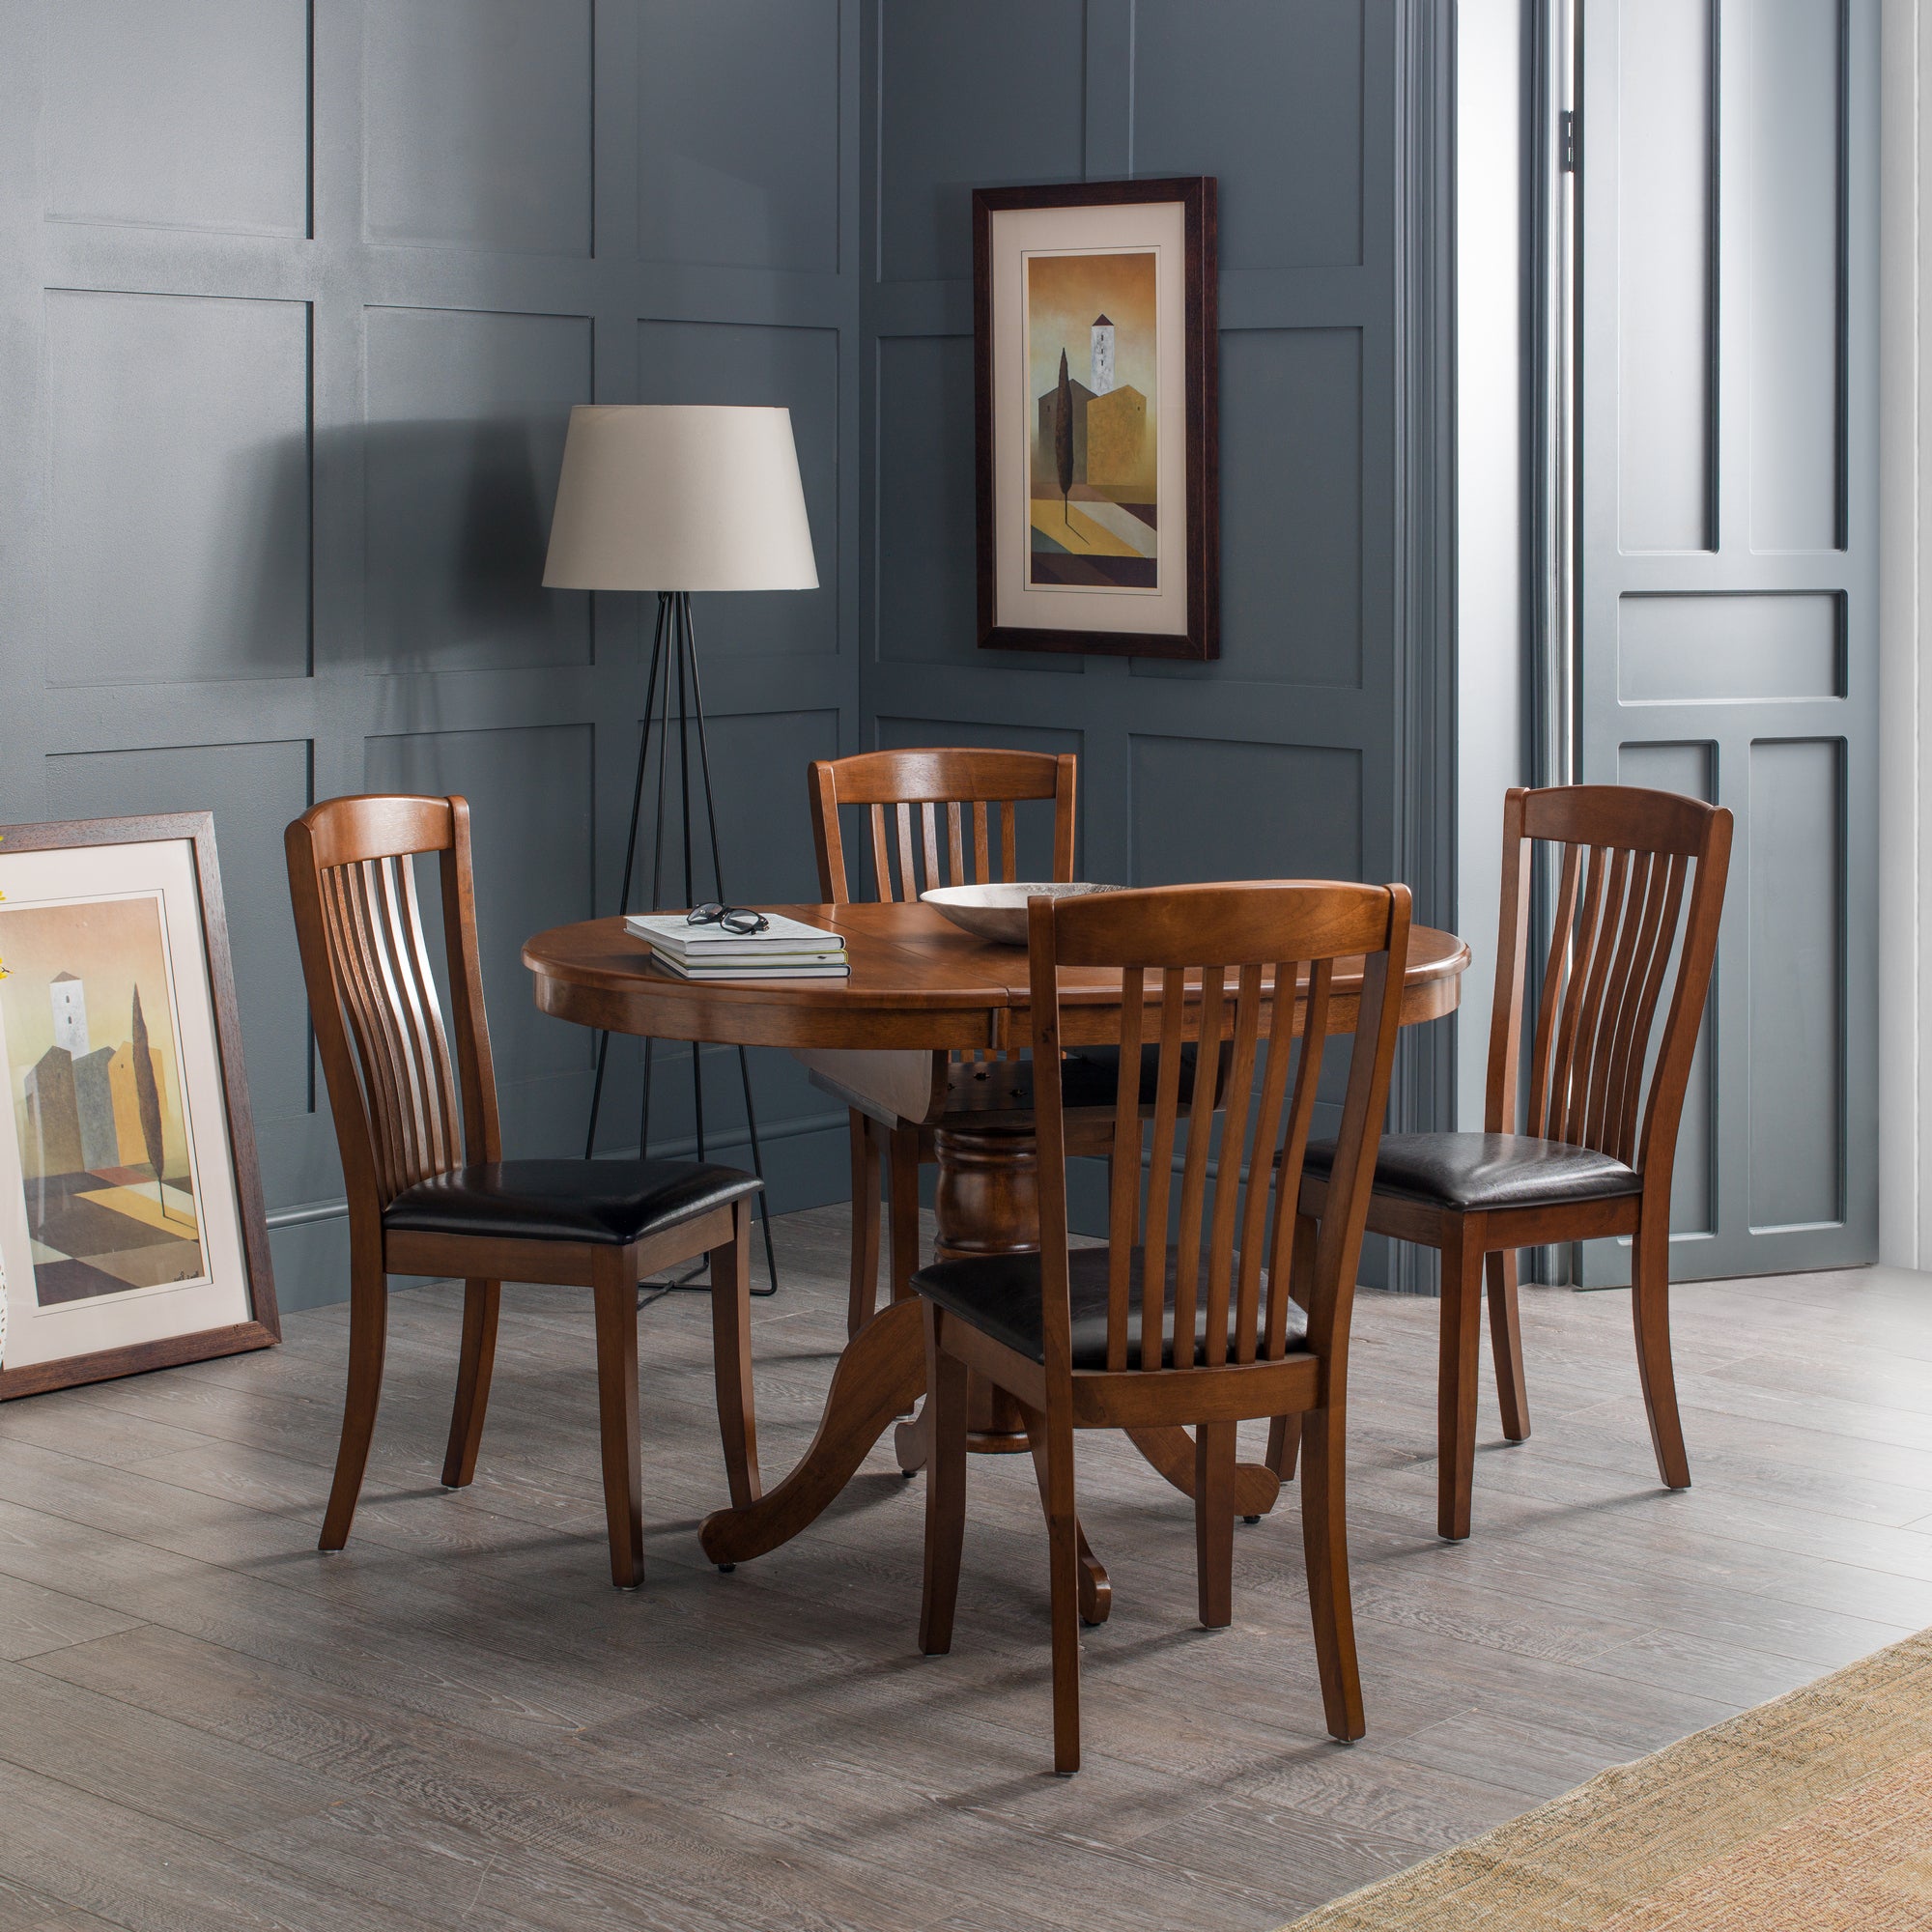 Canterbury Round to Oval Dining Table with 4 Chairs, Brown